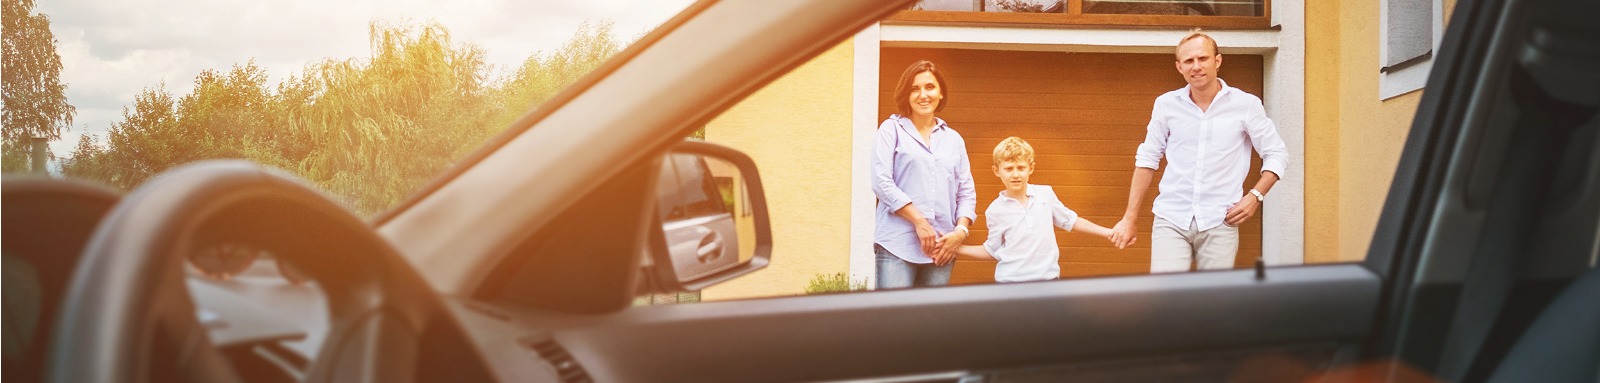 man woman and boy standing in front of a garage door next to a parked car